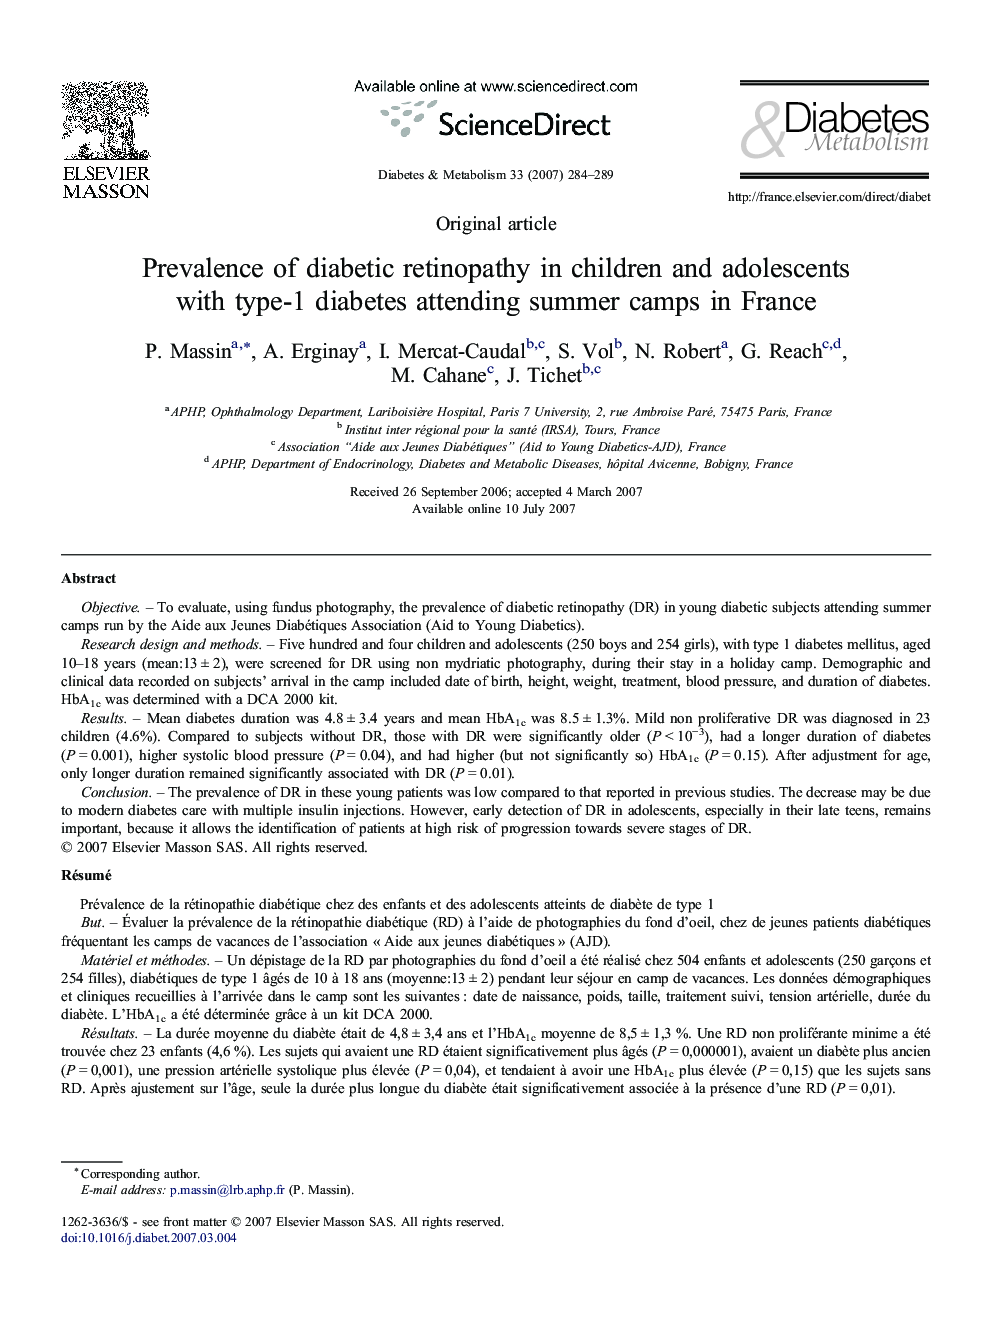 Prevalence of diabetic retinopathy in children and adolescents with type-1 diabetes attending summer camps in France